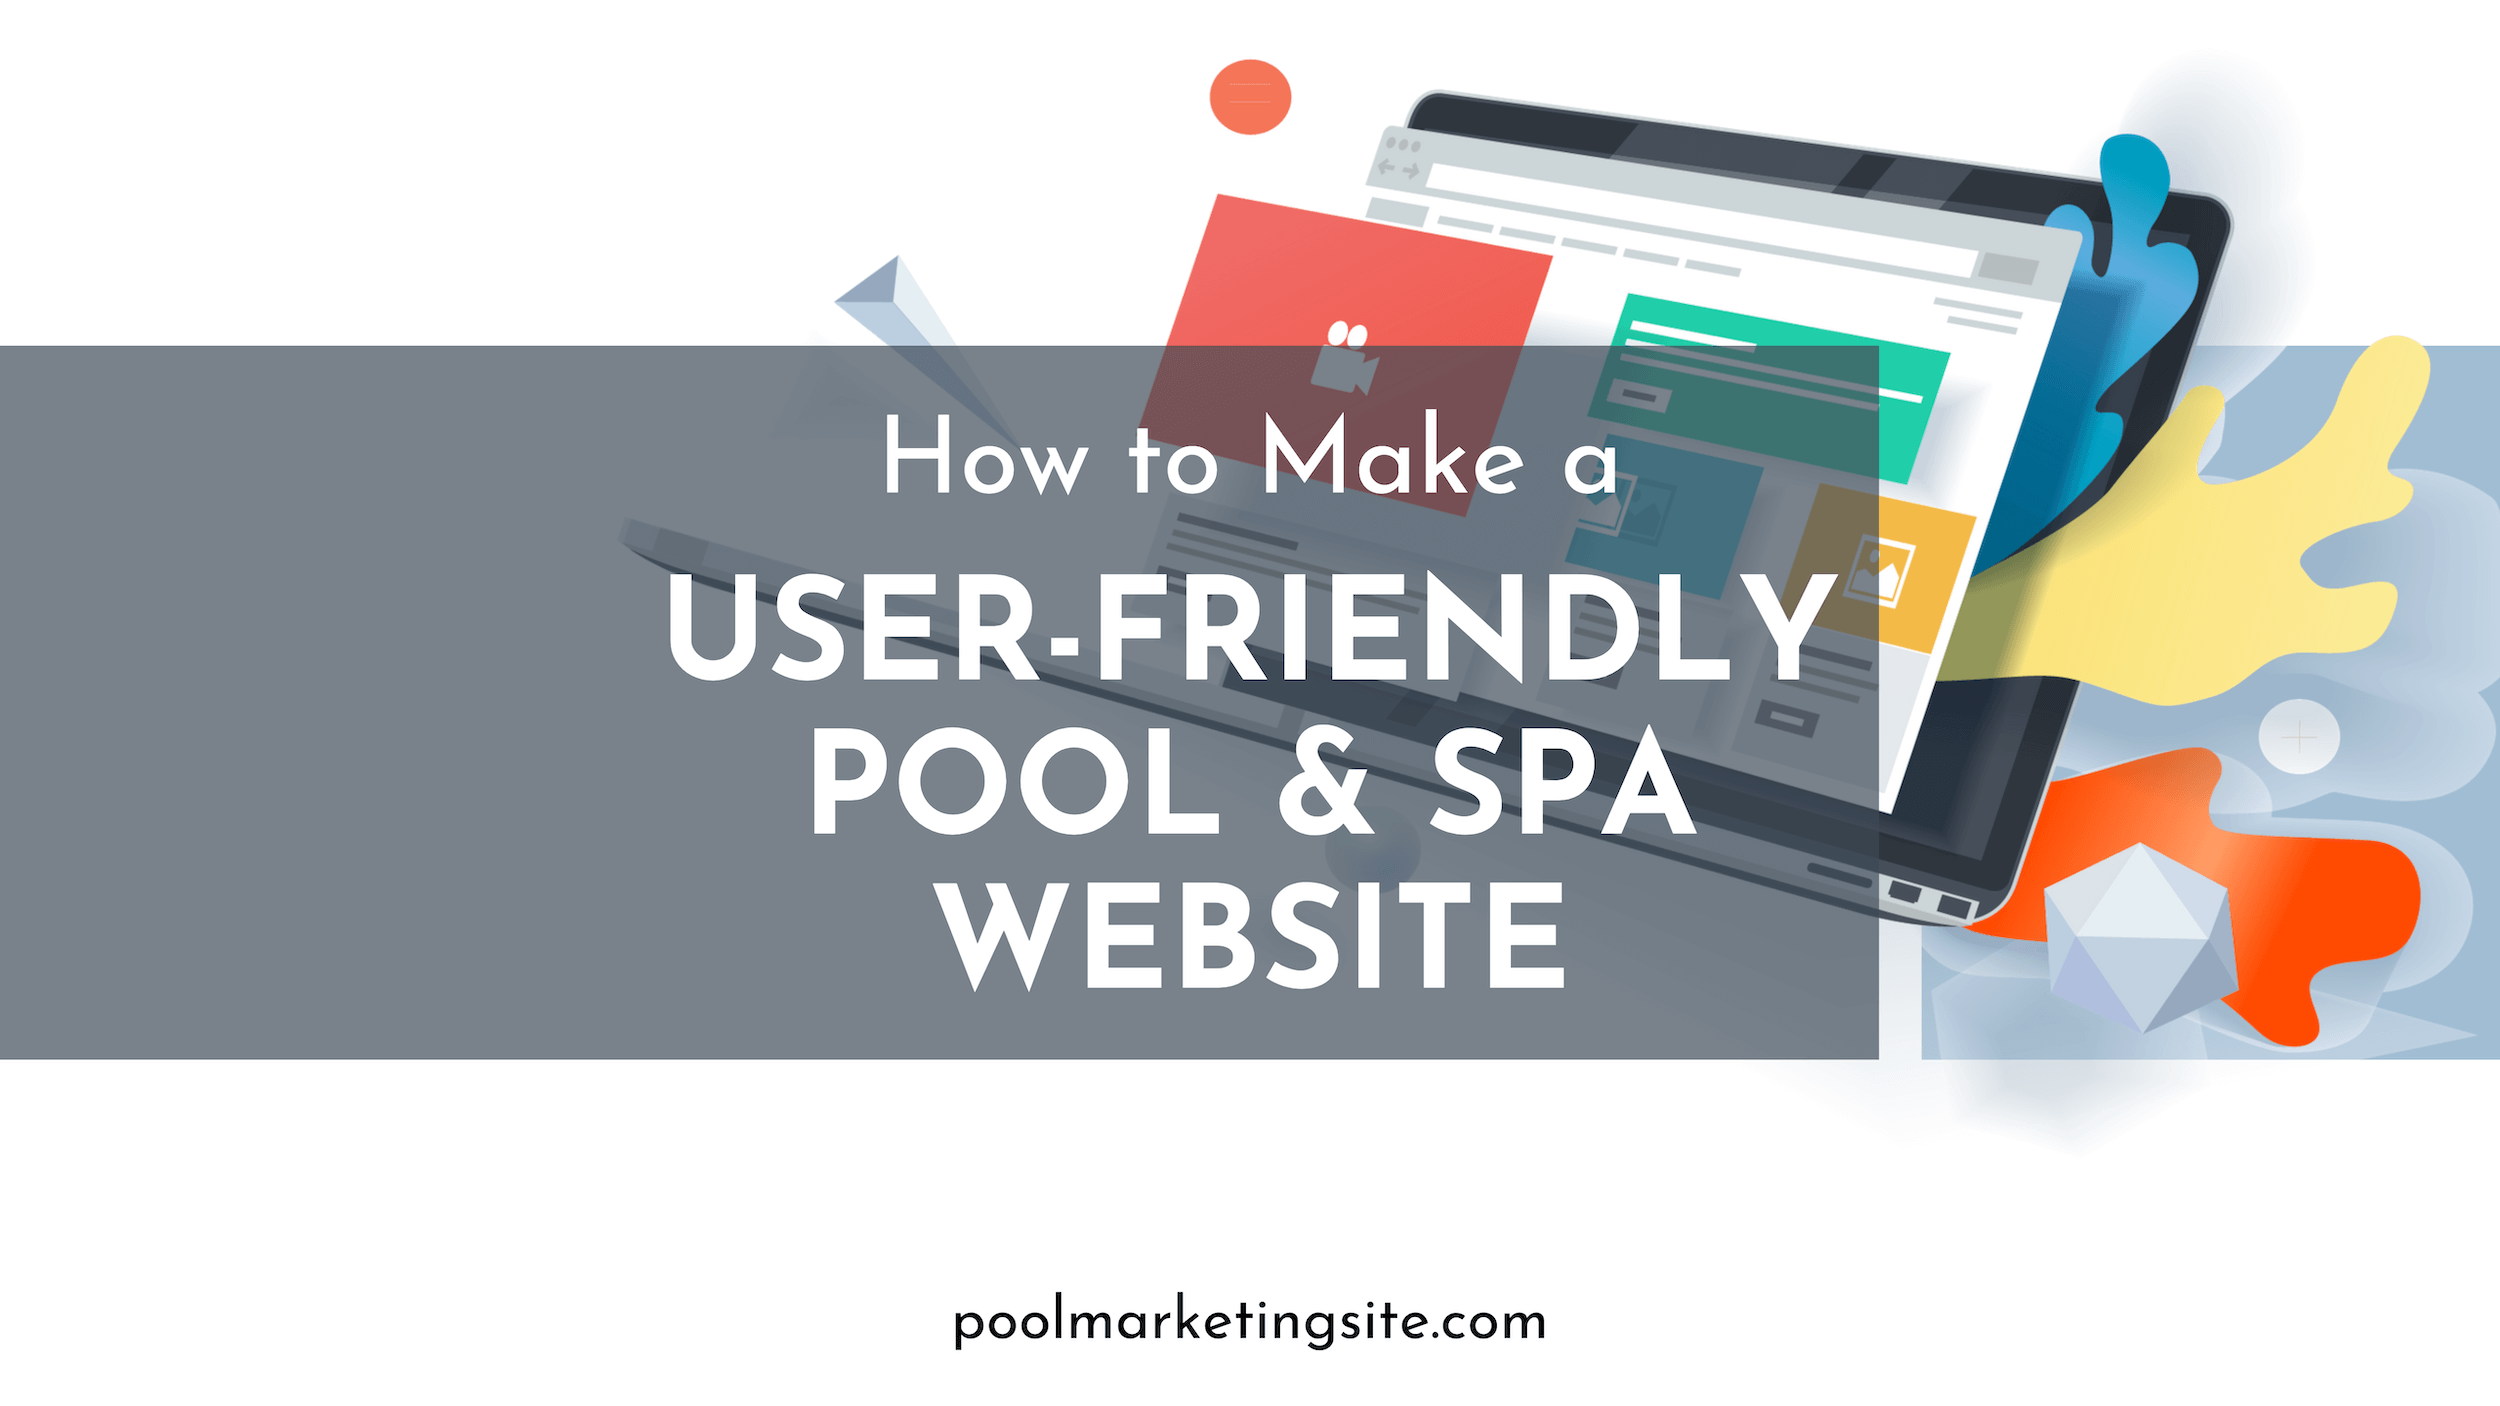 How to Make a User-Friendly Pool & Spa Website